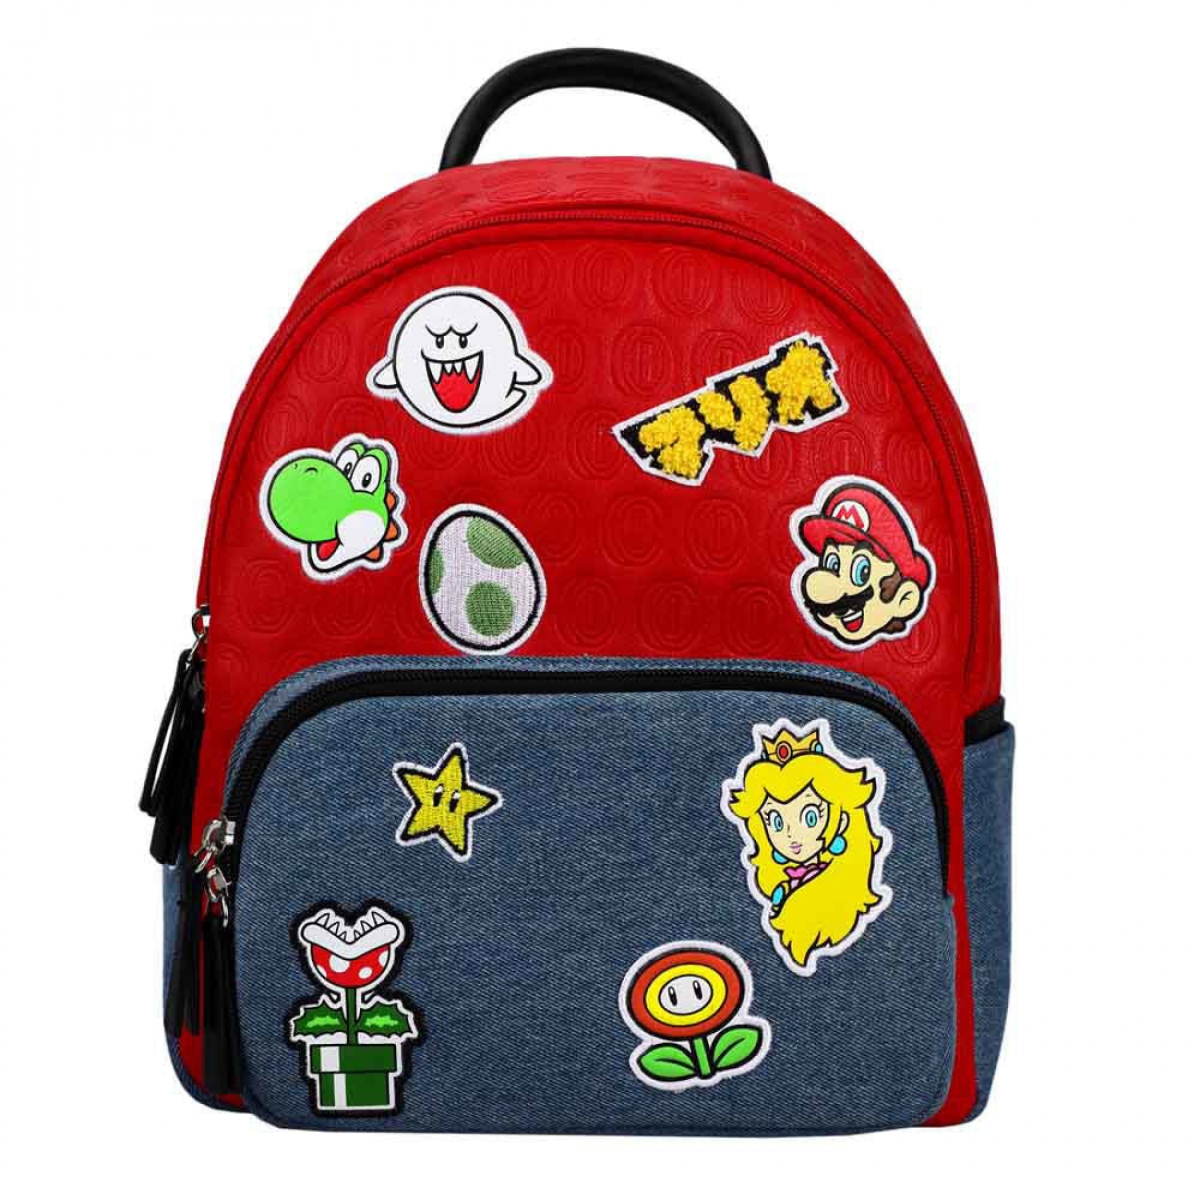 Nintendo 874382 12 in. Super Mario Bros. Patch Collage Backpack